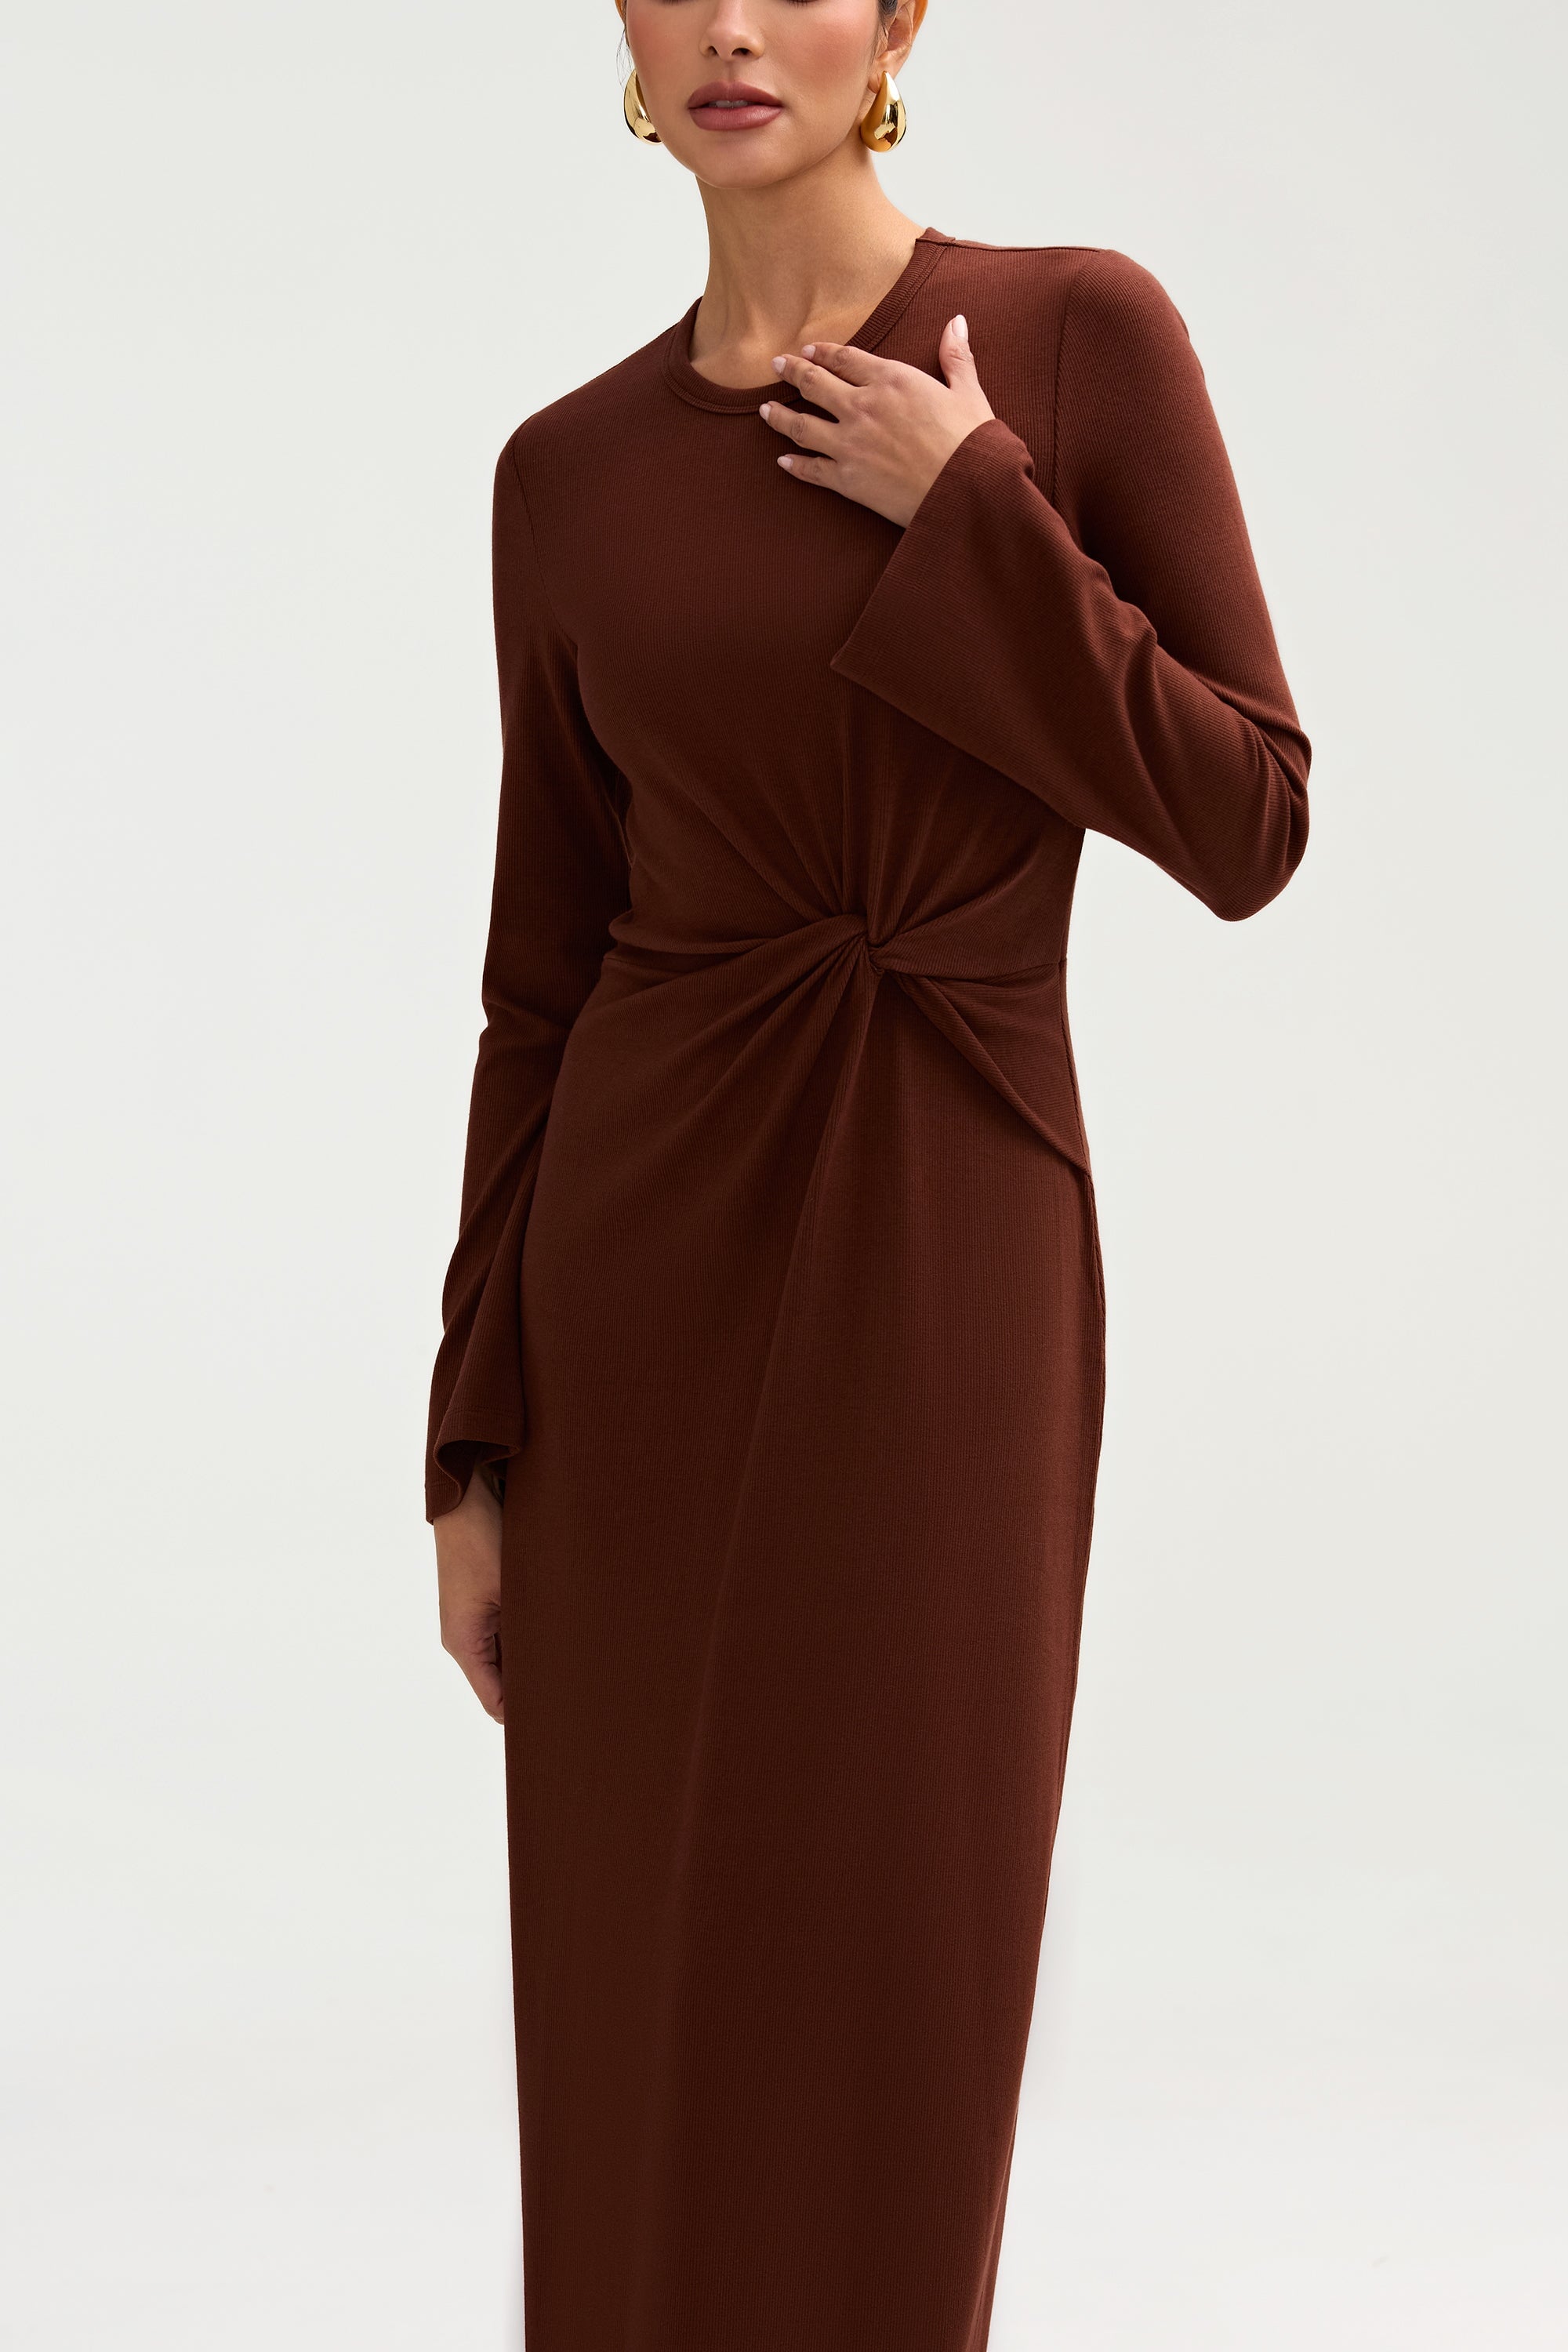 Aissia Ribbed Twist Front Maxi Dress - Chocolate Clothing Veiled 